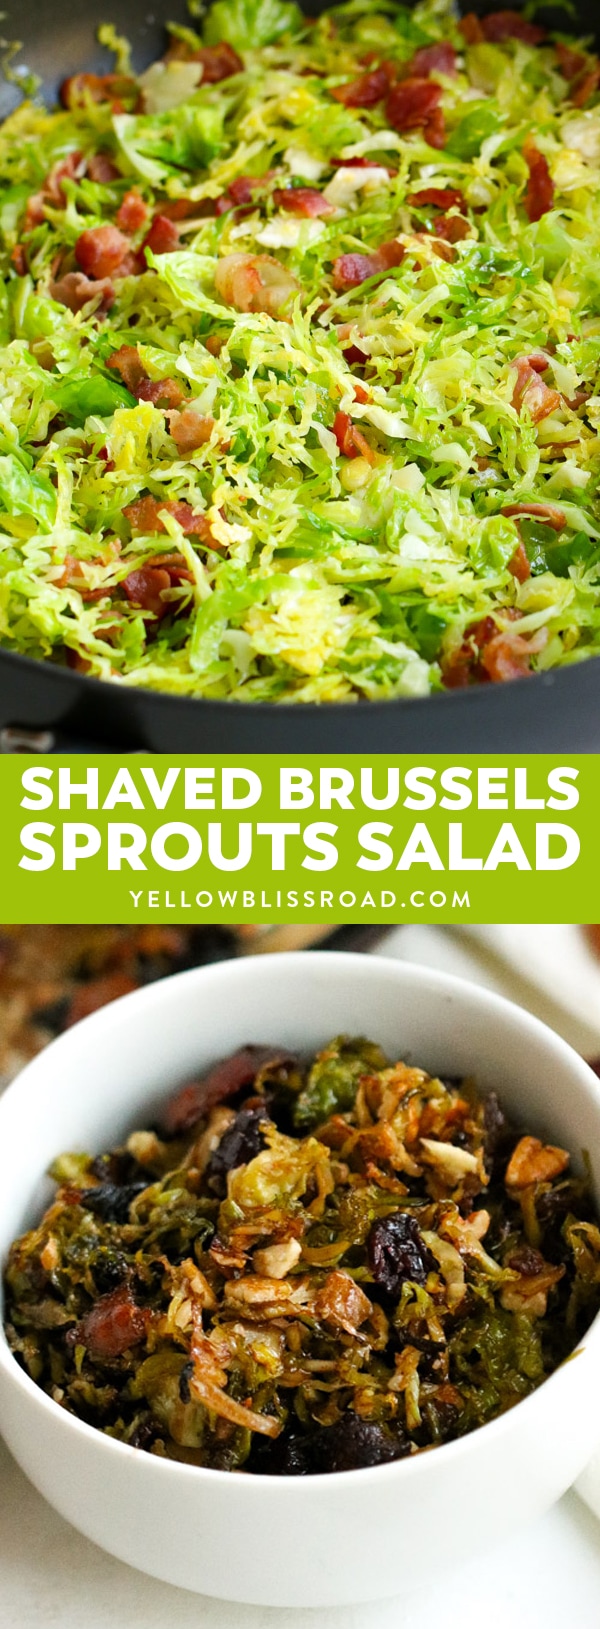 Shaved Brussels Sprouts Salad | Festive Fall Side Dish